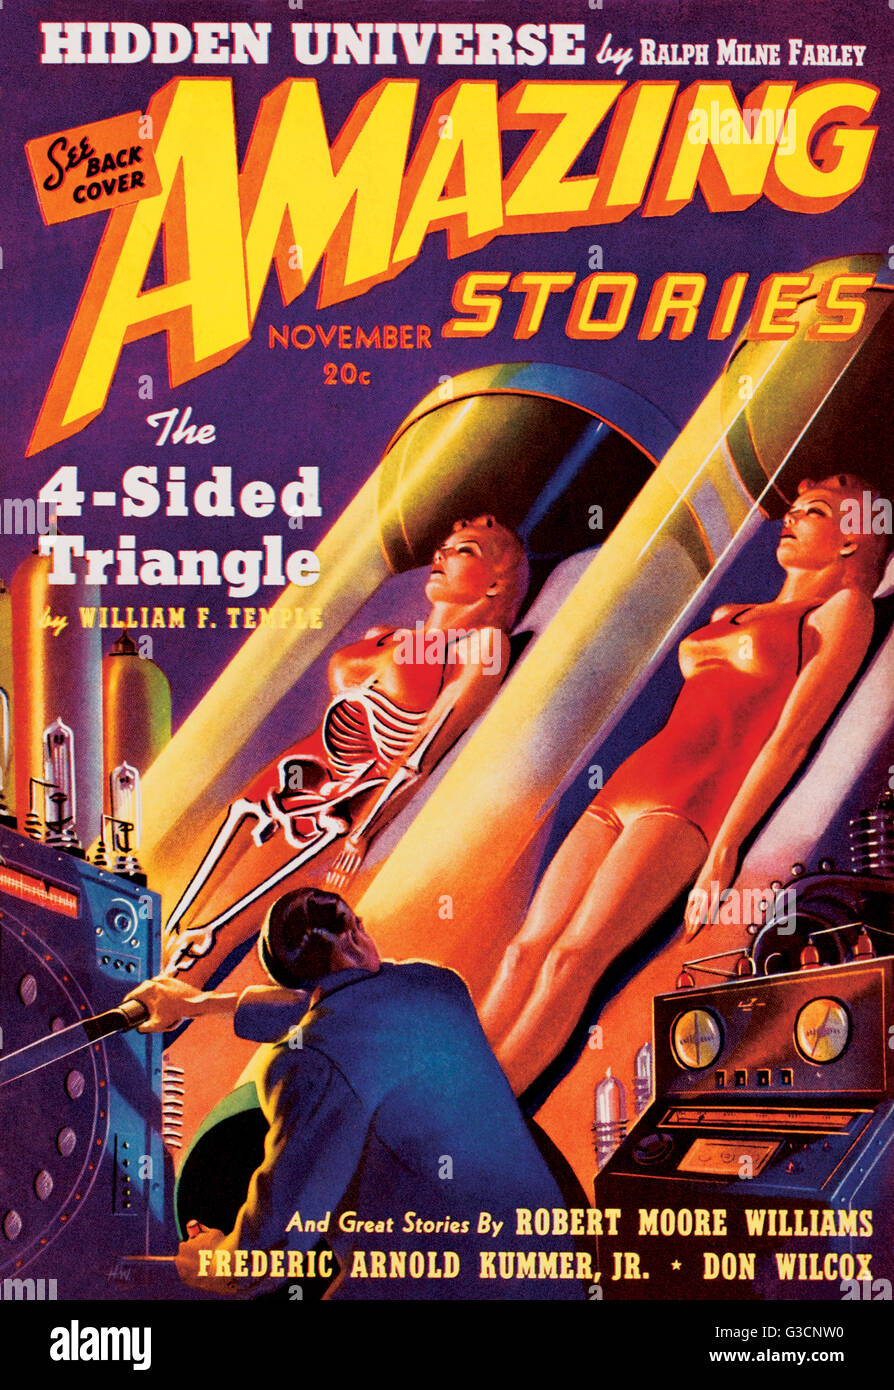 THE 4-SIDED TRIANGLE, by William F Temple. A scientist clones the body of a young woman in his laboratory in this futuristic science fiction magazine cover      Date: 1939 Stock Photo